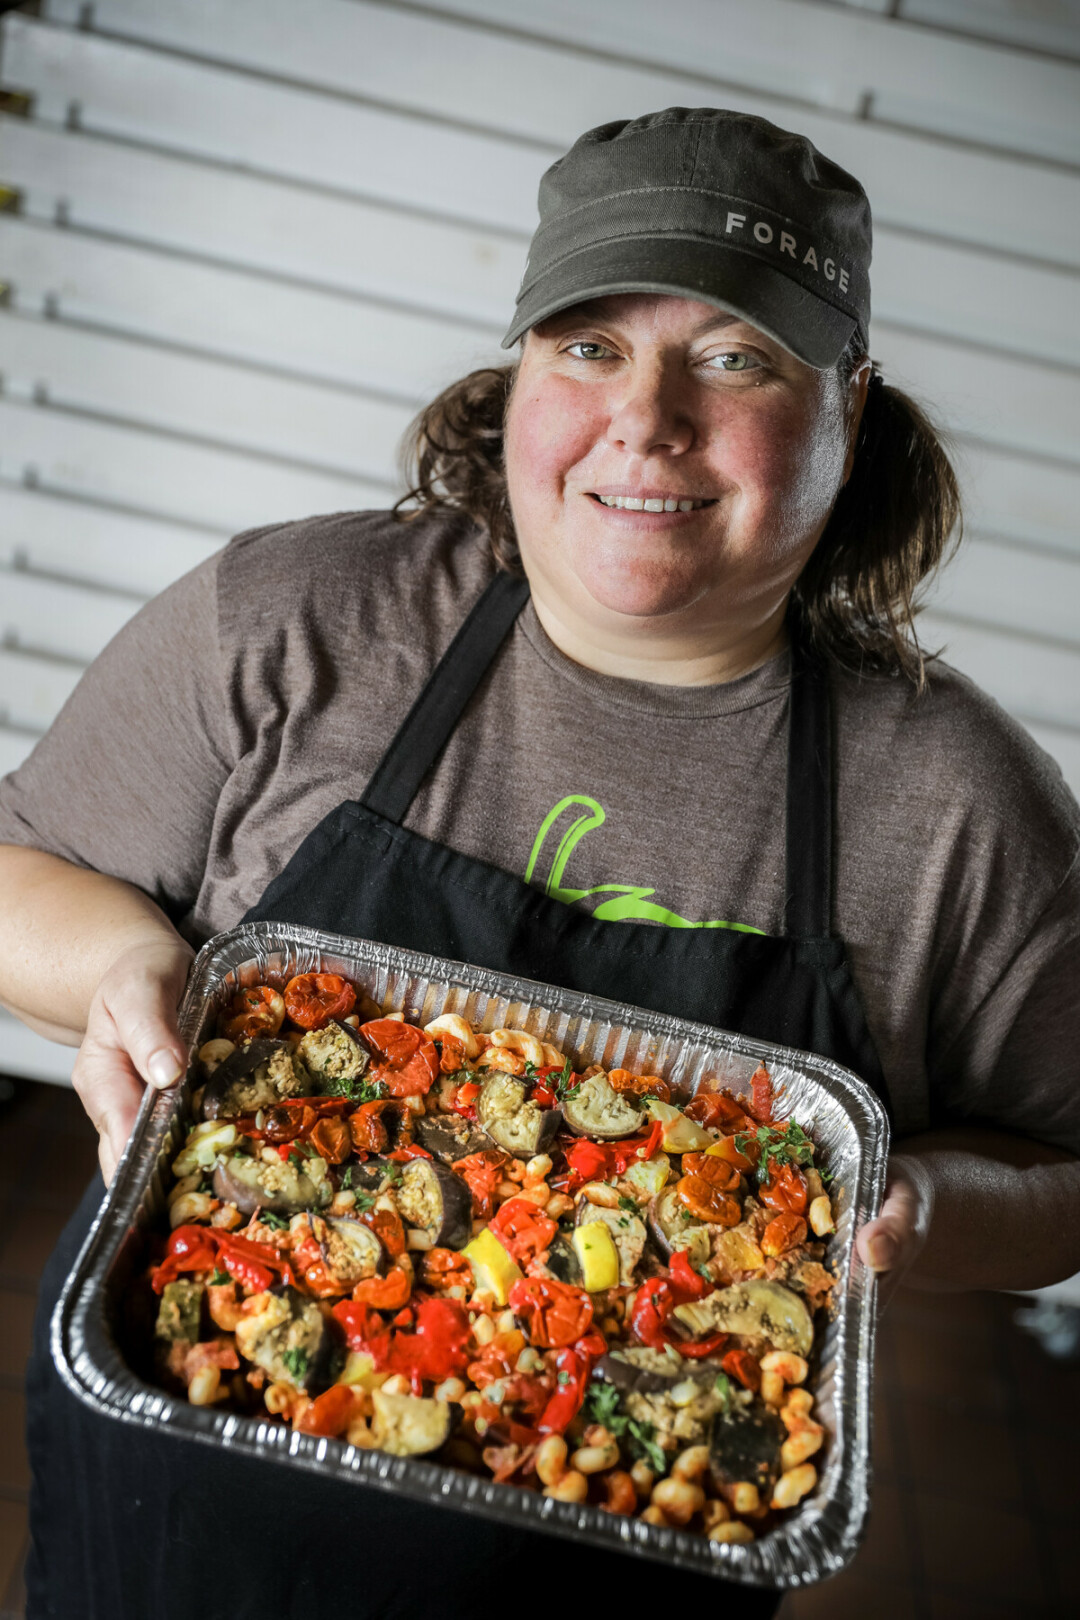 Michelle Thiede is one of the few vegan/vegetarian chefs in the area, focusing on fresh, healthy options for folks who live with veggie-based diets.